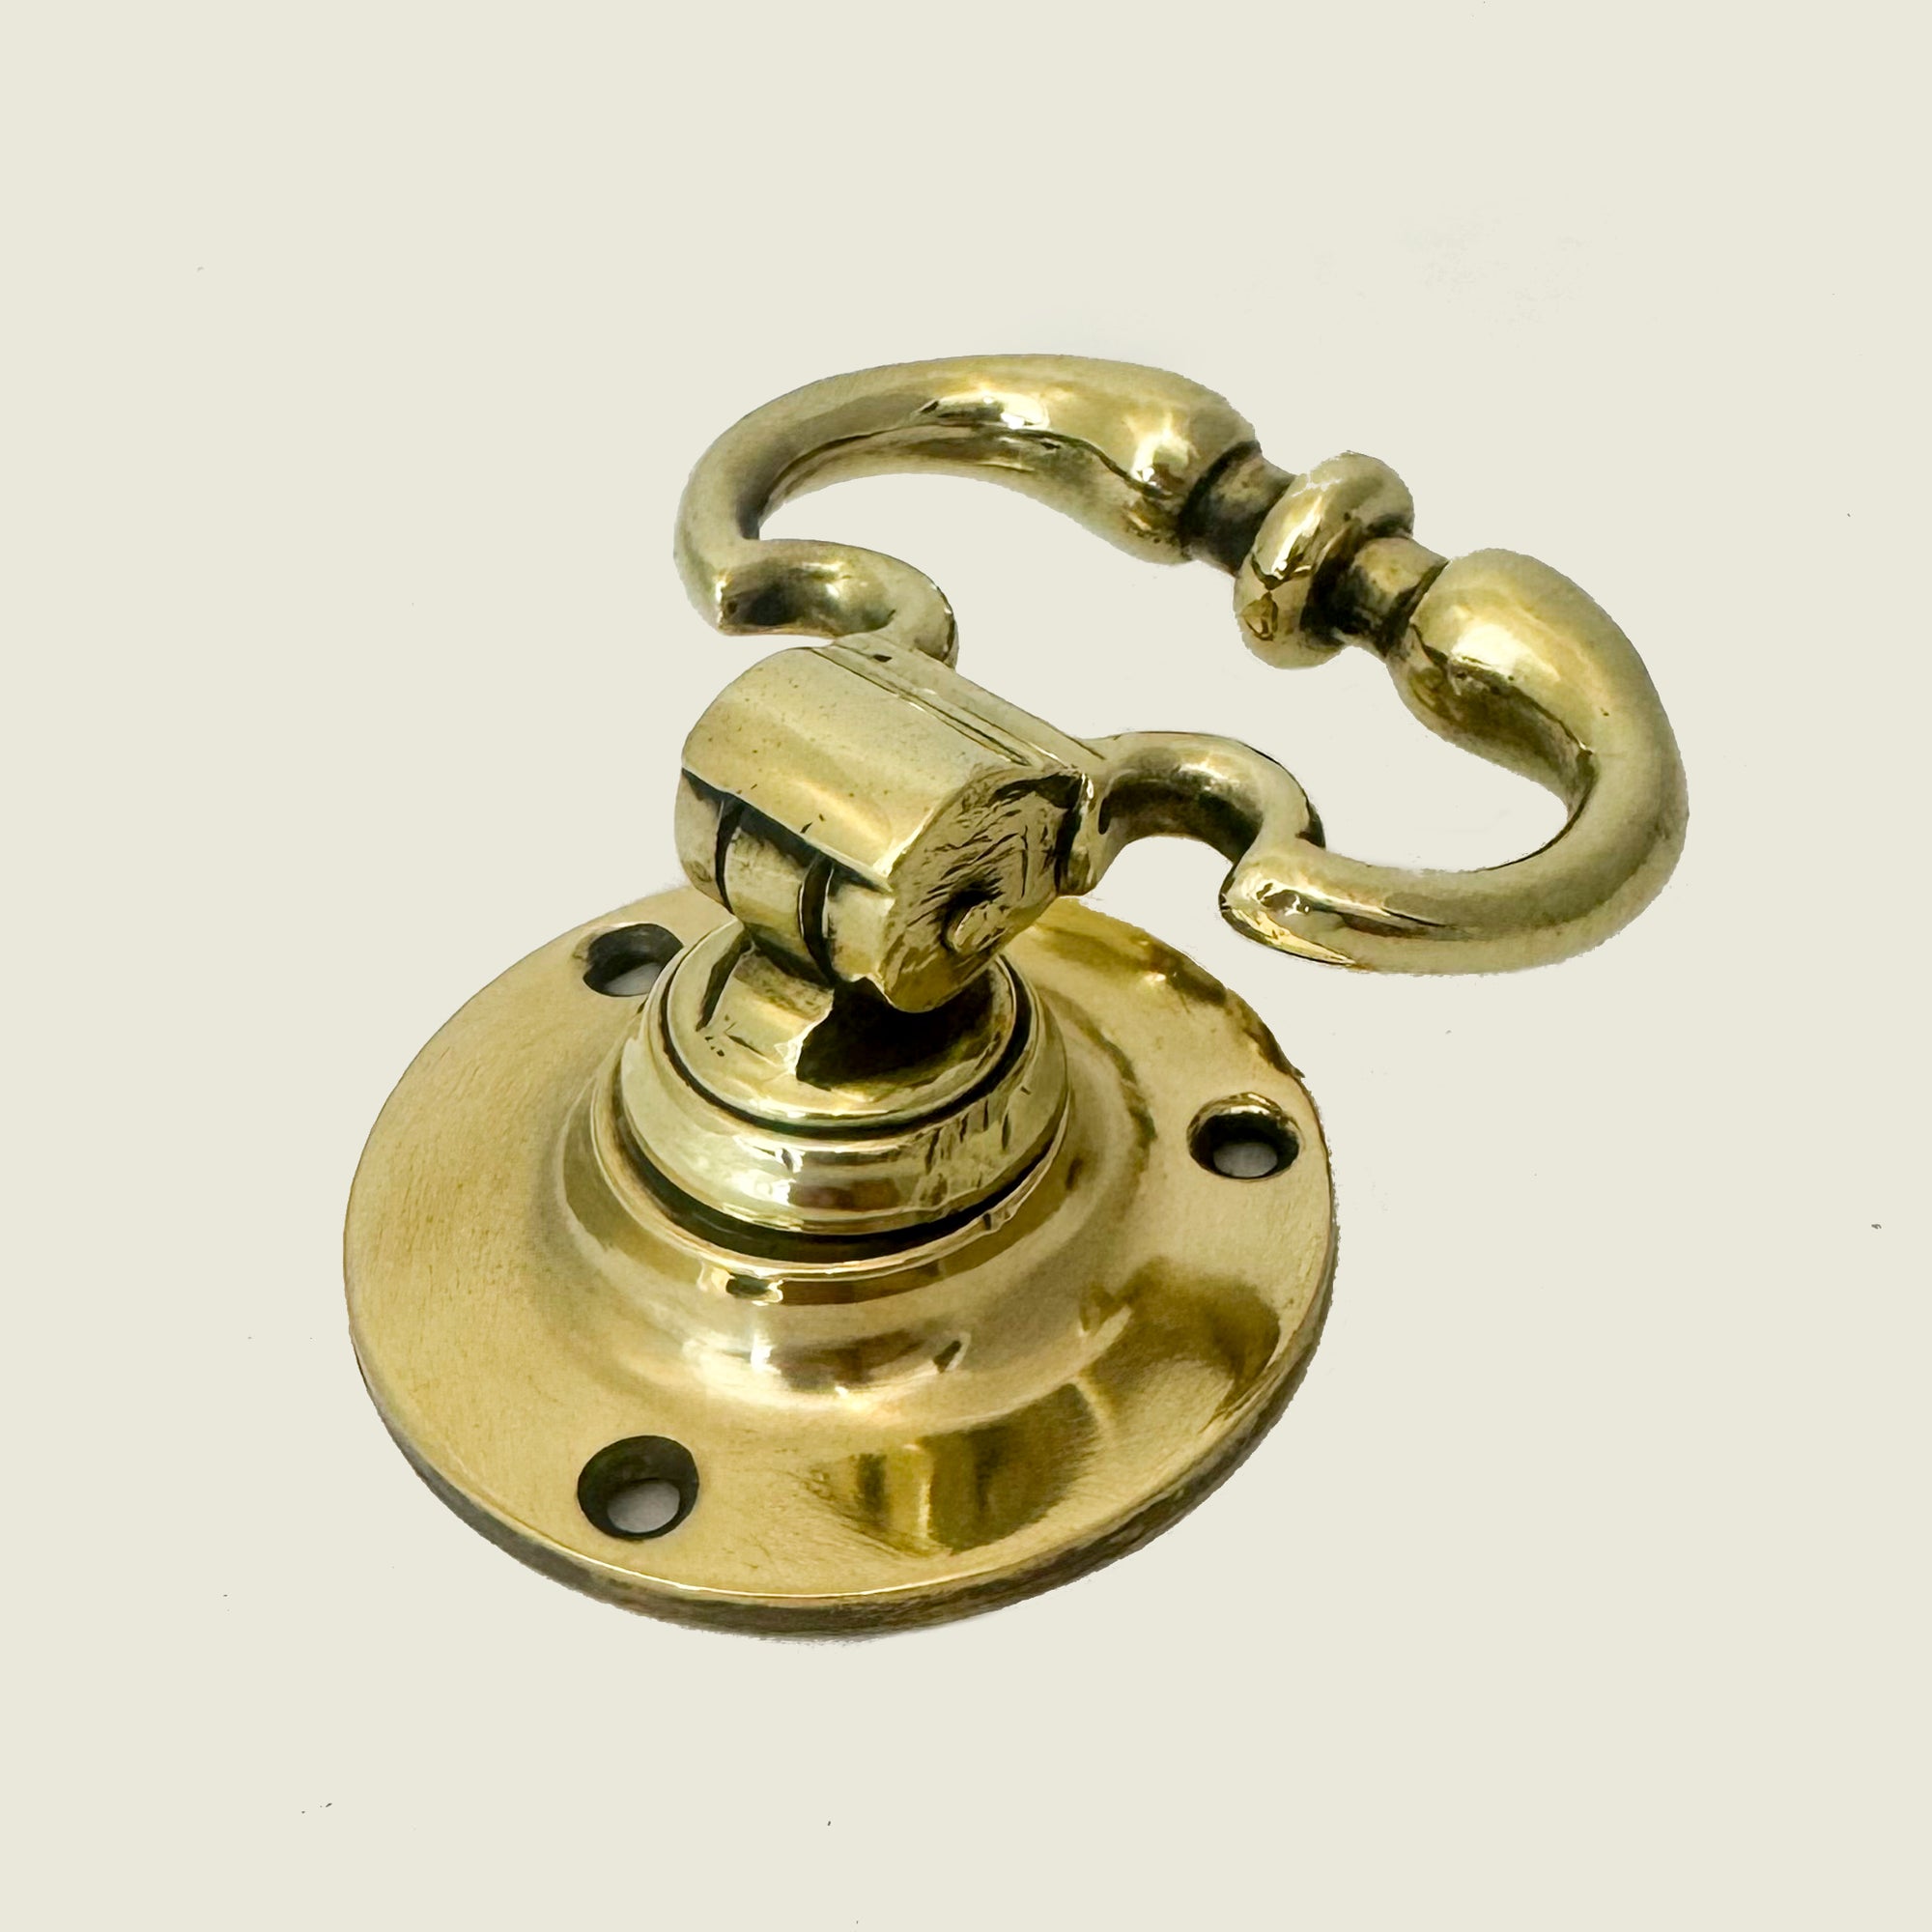 Antique Brass Drop Ring Door Handles | 5 Pairs Available | The Architectural Forum